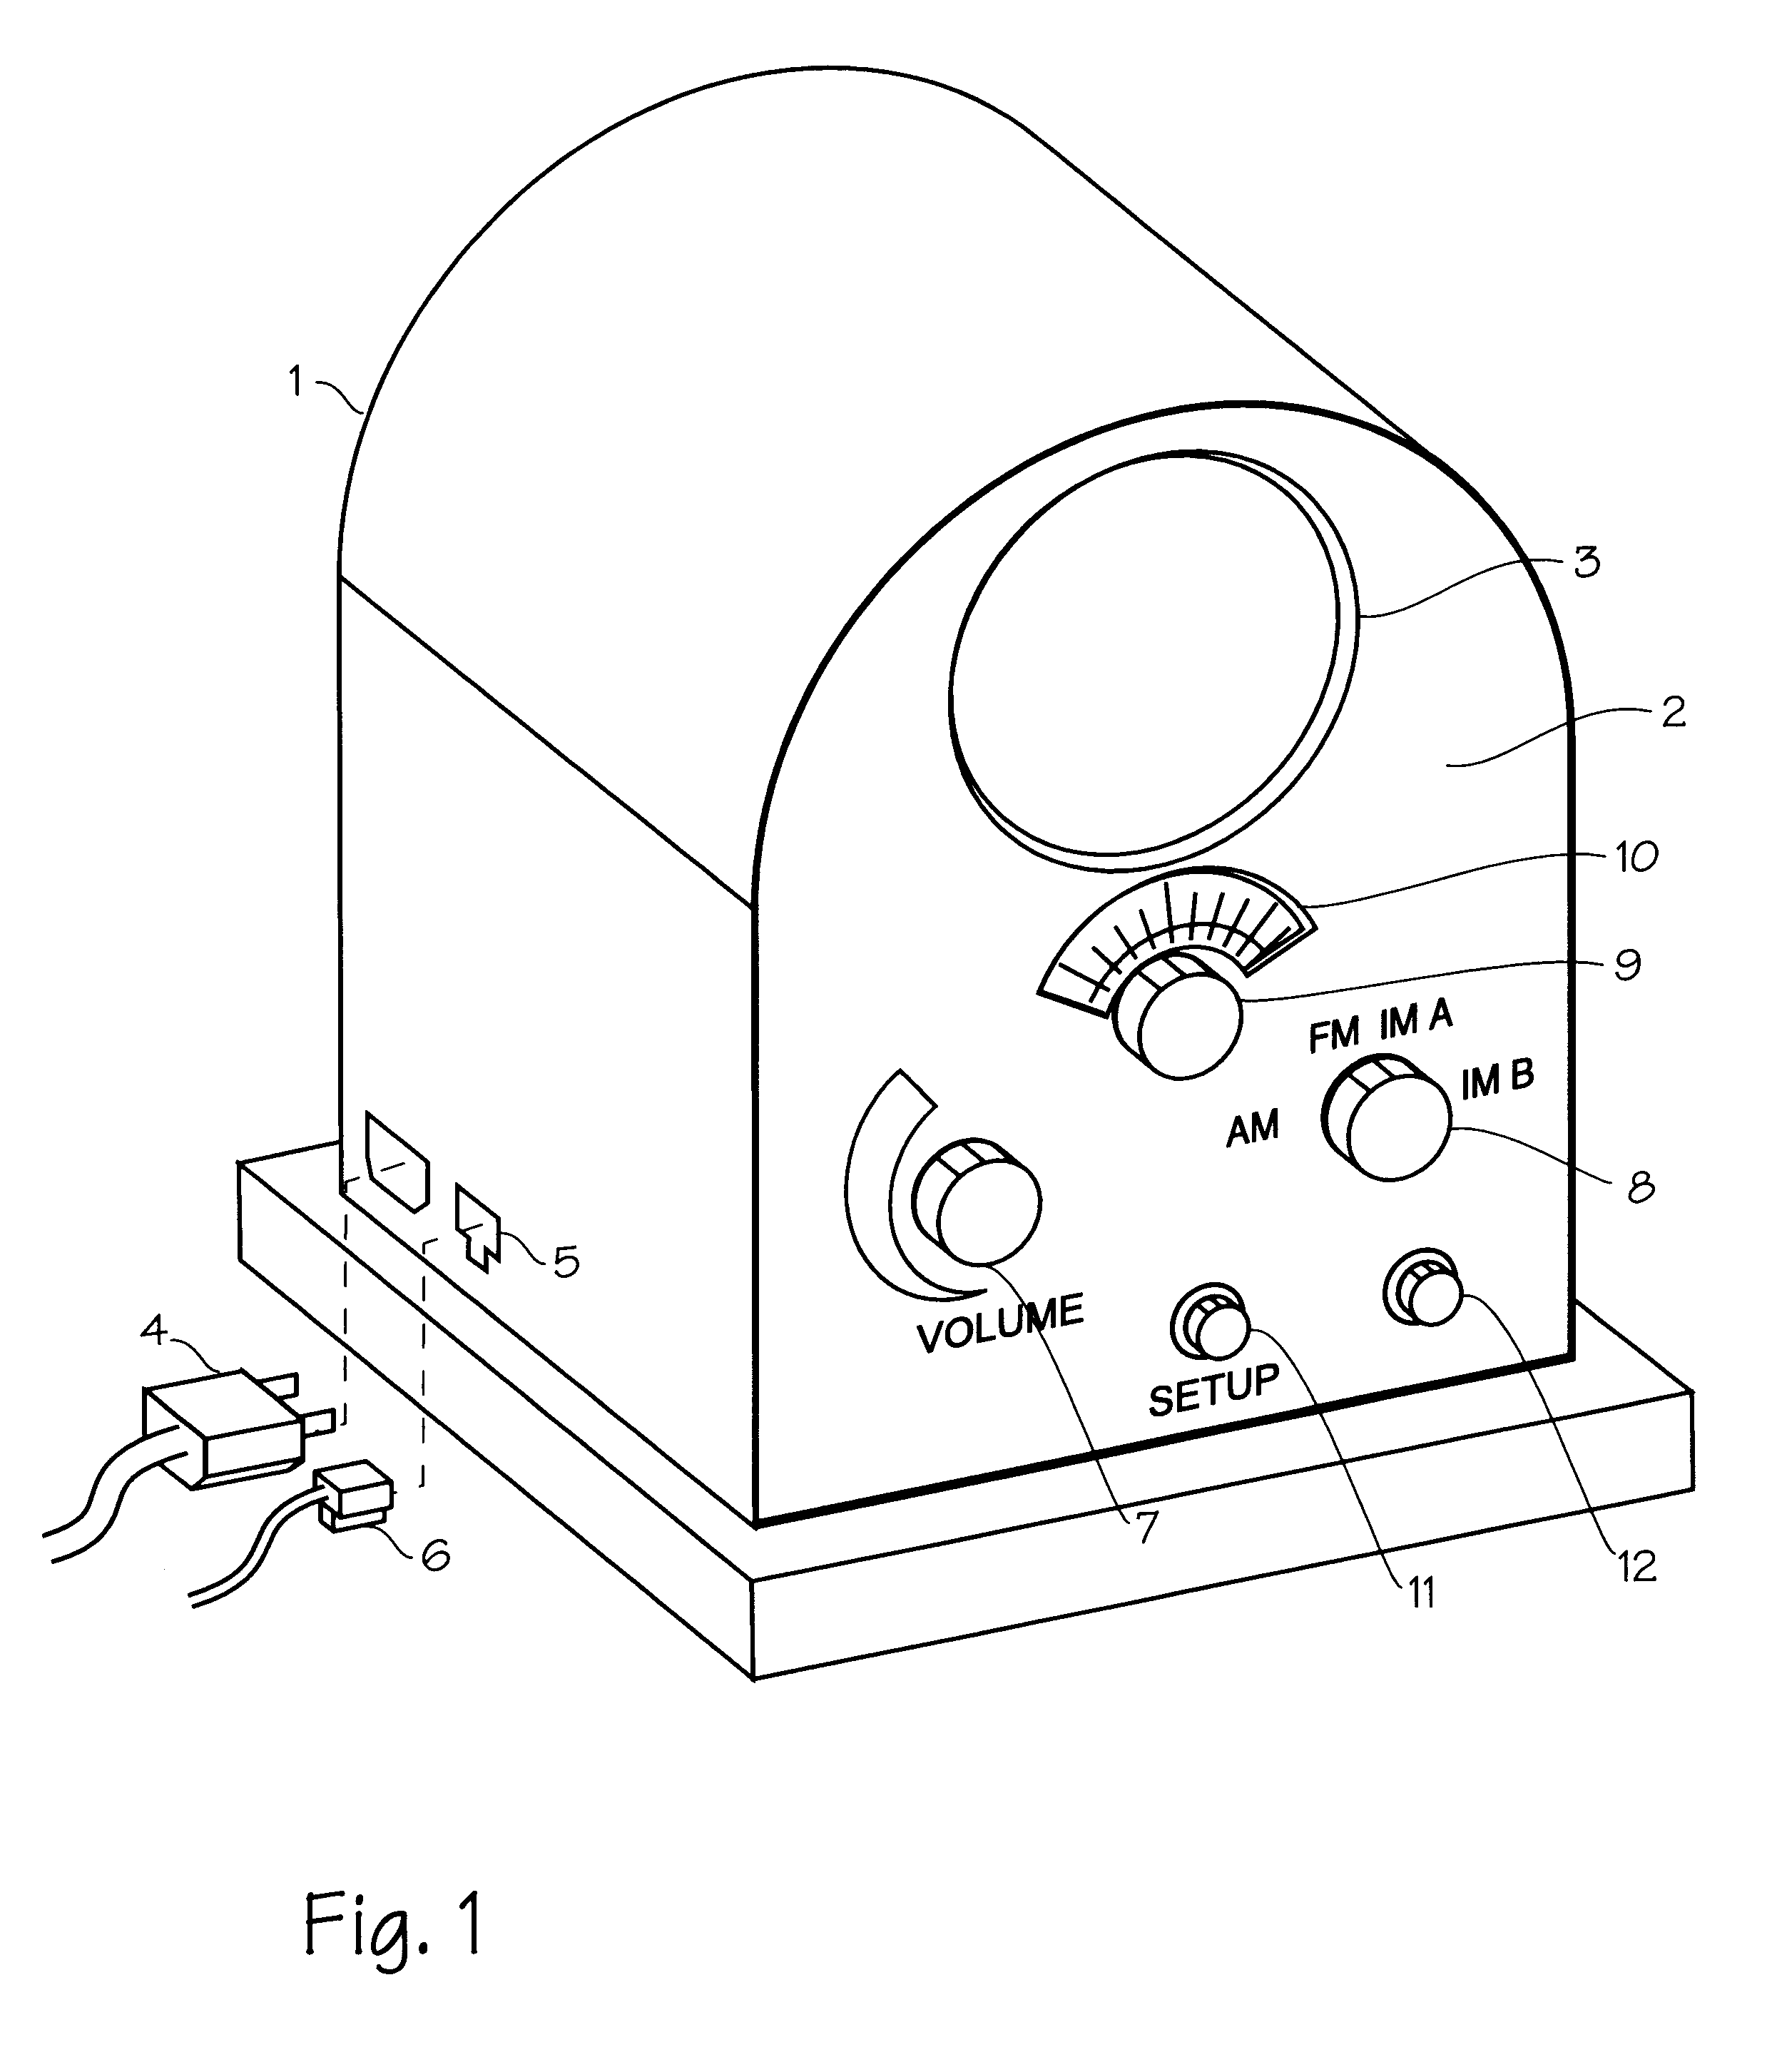 Internet radio receiver having a rotary knob for selecting audio content provider designations and negotiating internet access to URLS associated with the designations